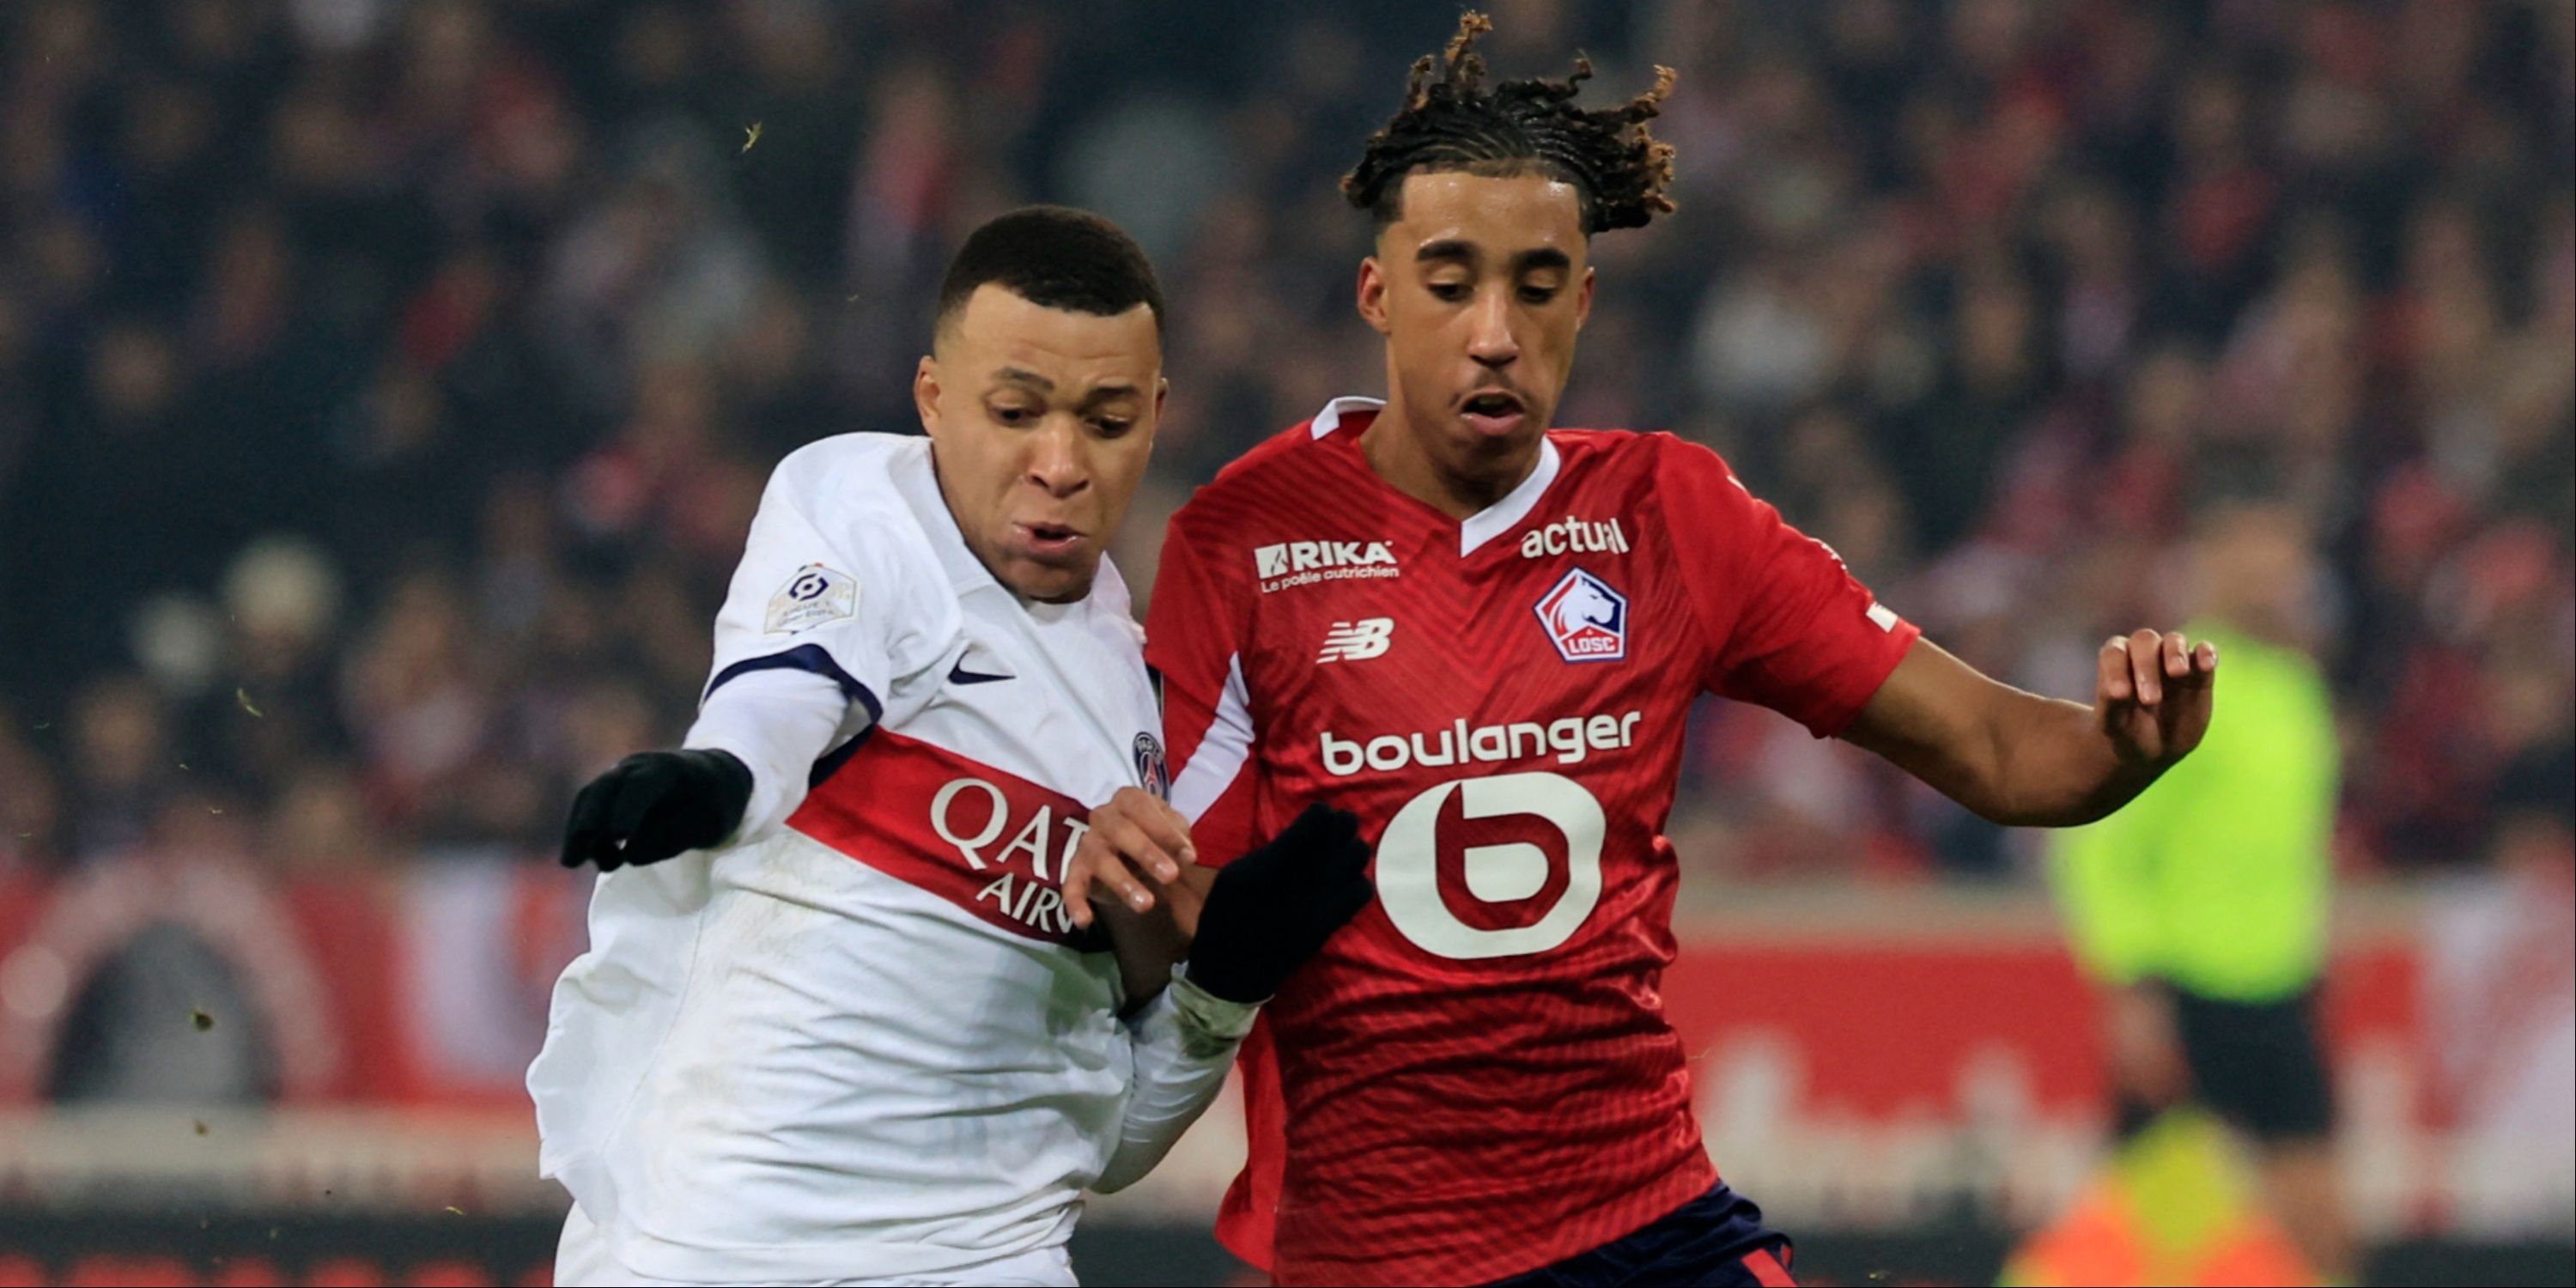 Lille defender Leny Yoro and Paris Saint-Germain attacker Kylian Mbappe battle for the ball